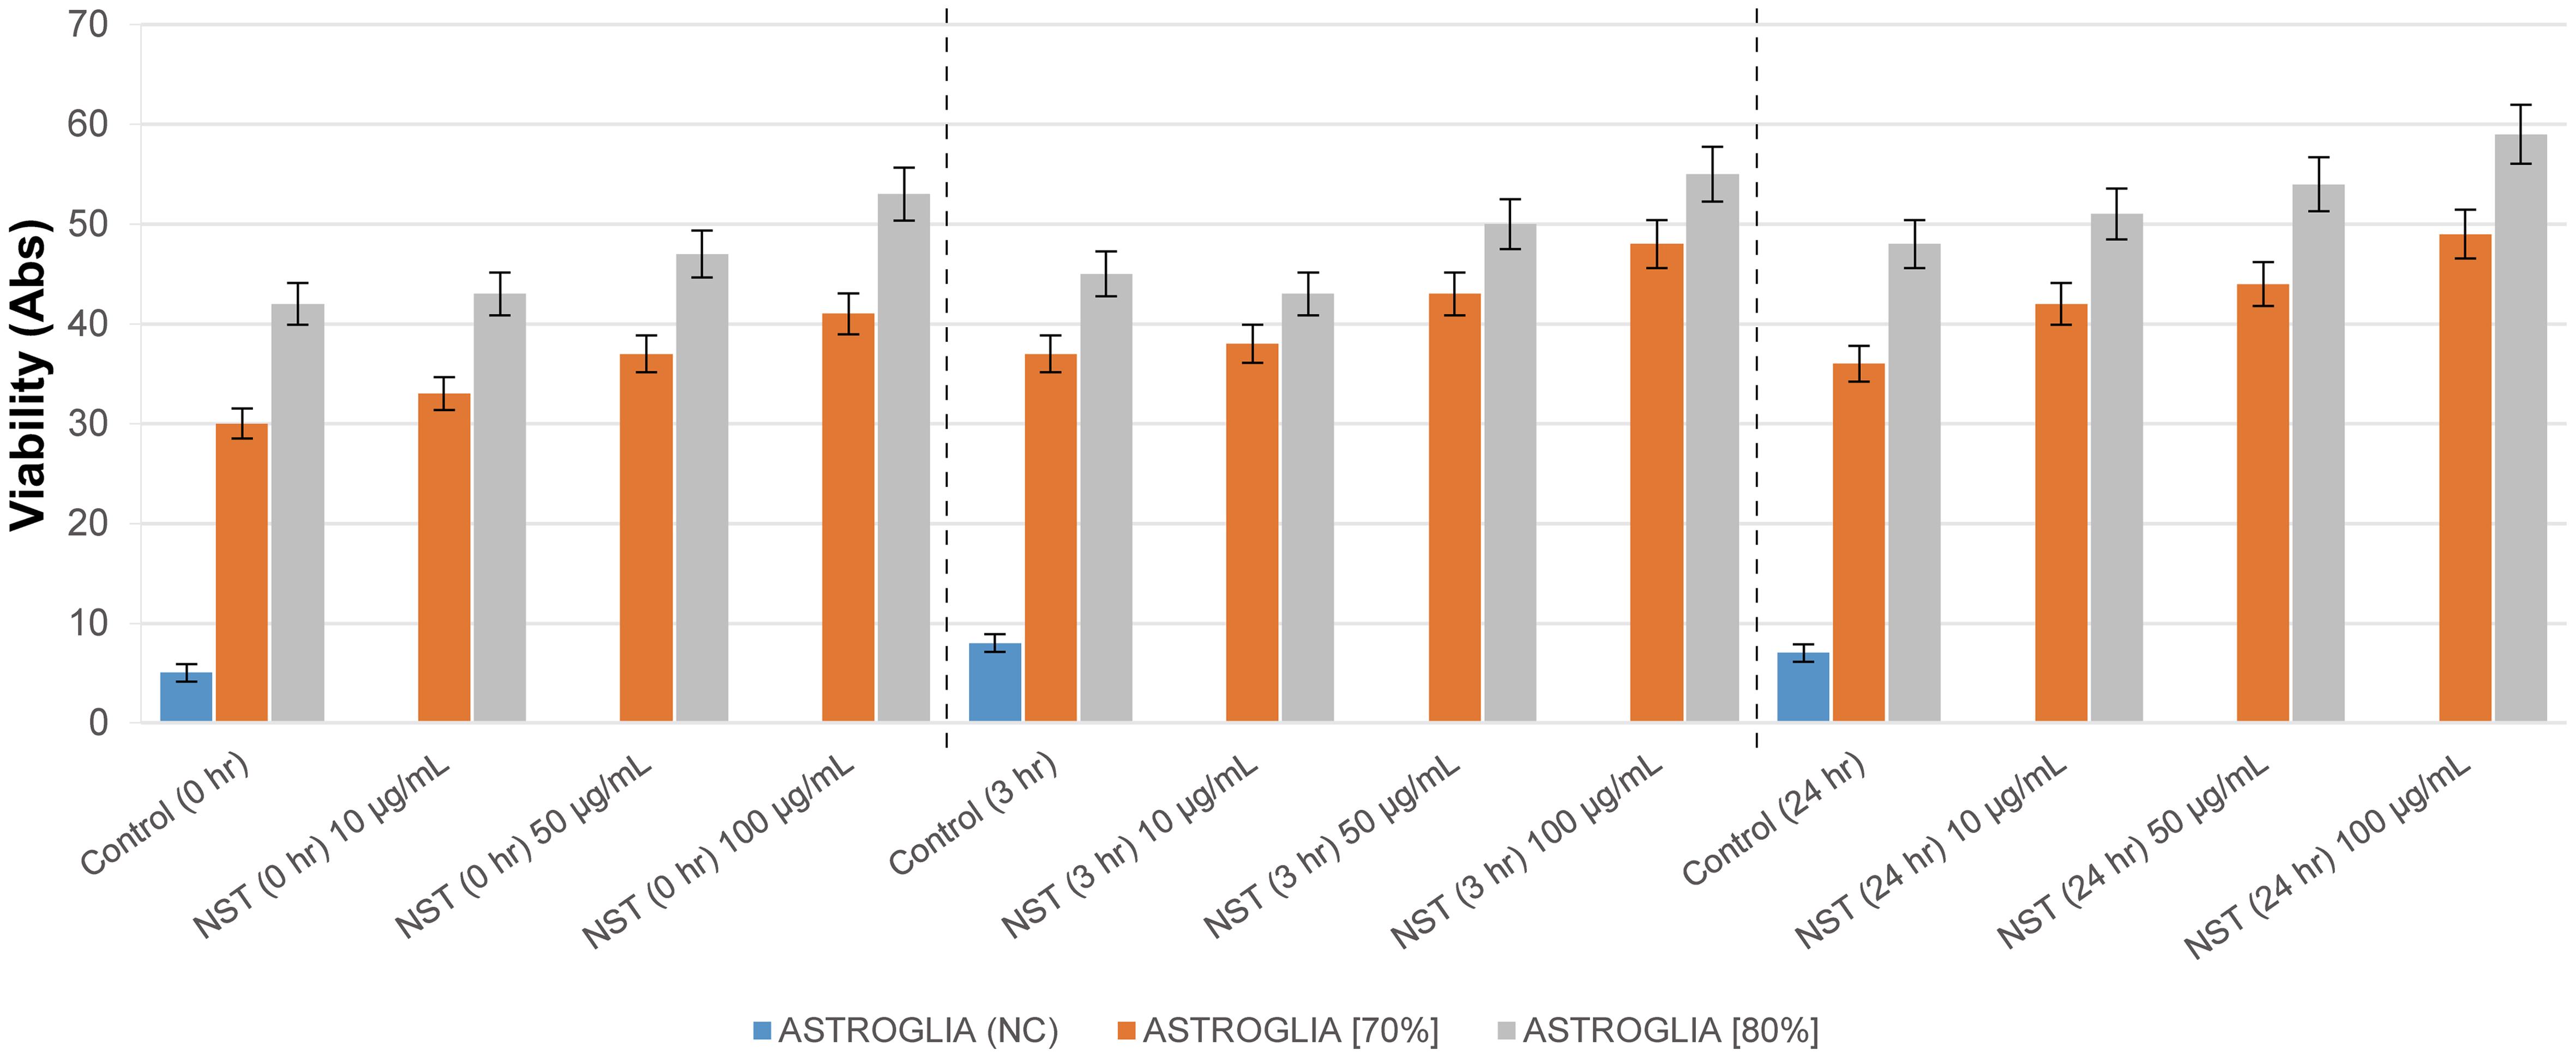 Nosustrophine improved the survival of astroglial cells  after oxygen and glucose deprivation.